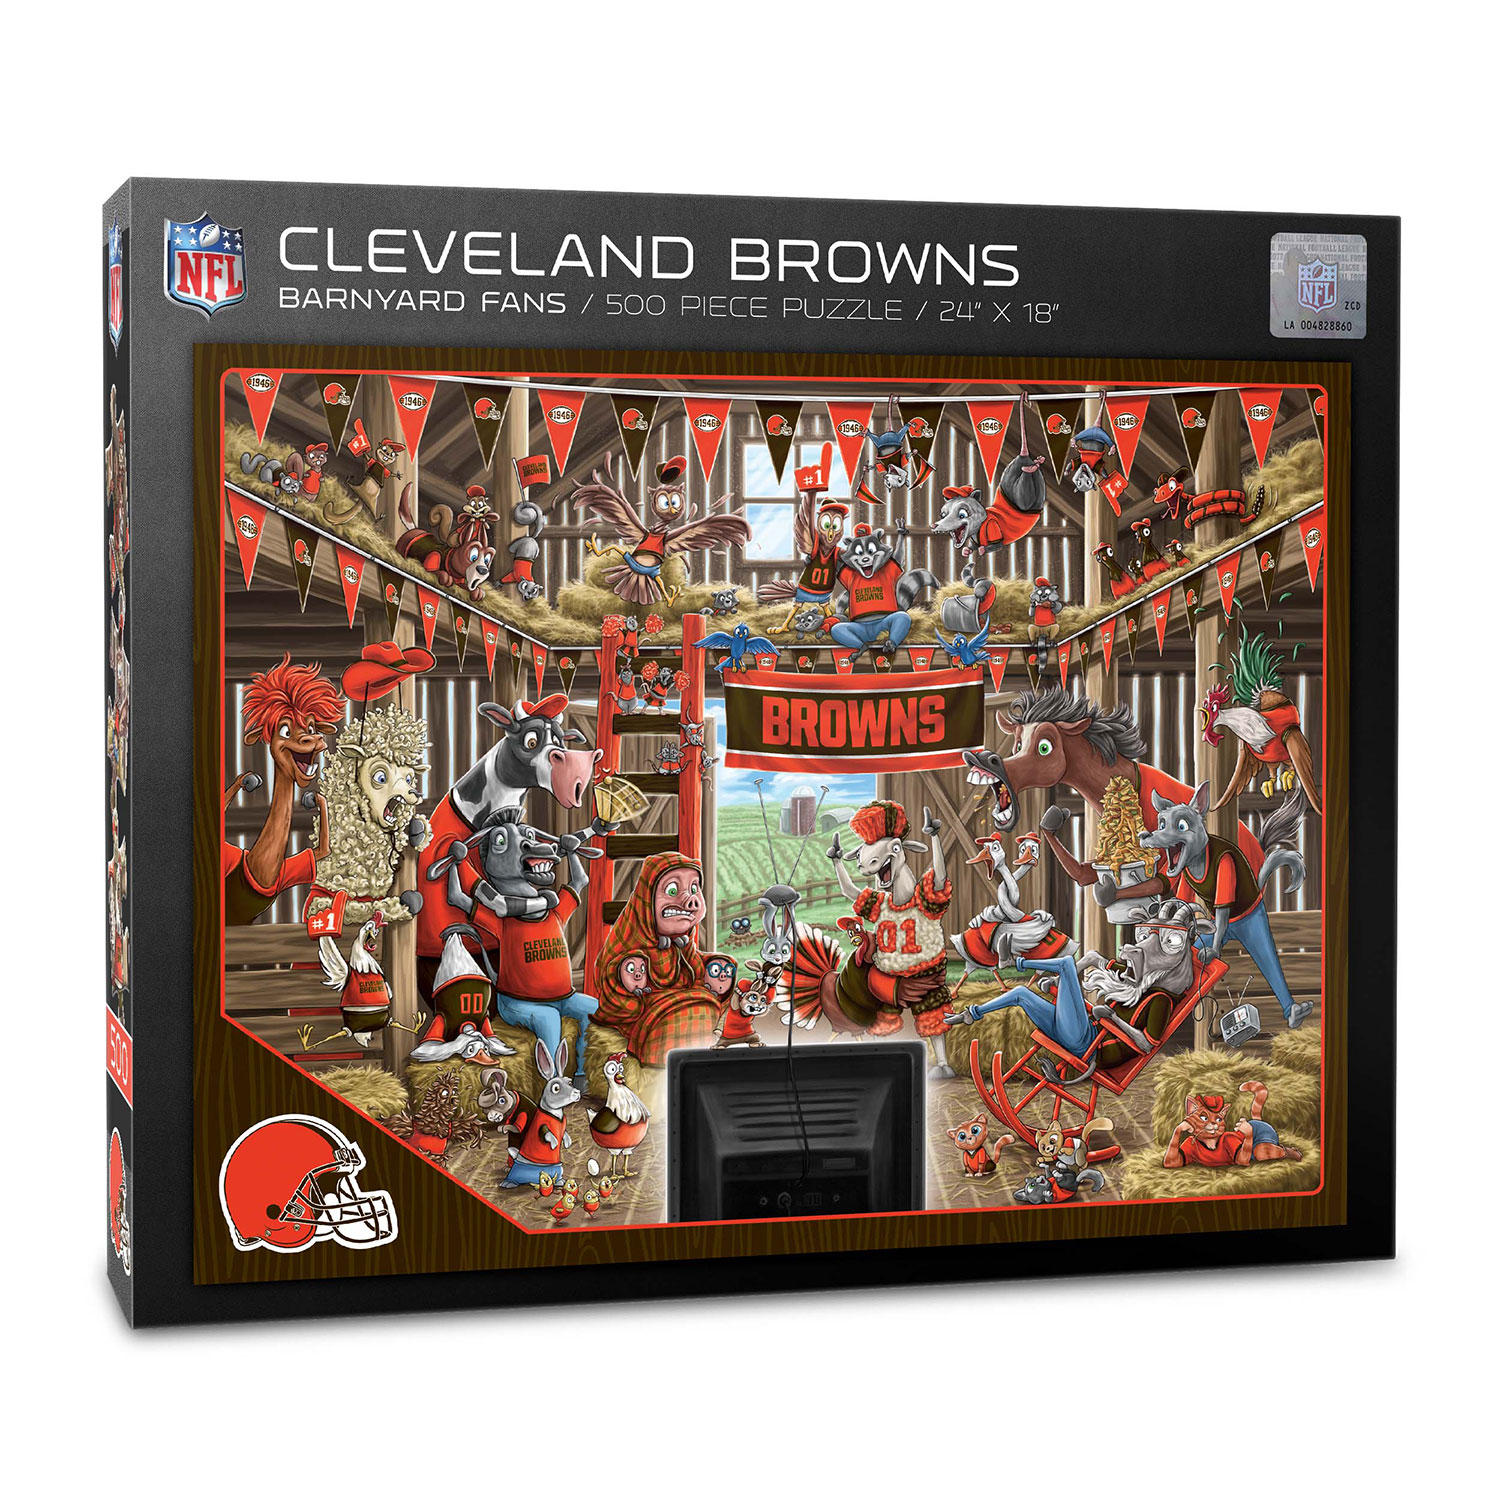 NFL Barnyard Fans 500pc Puzzle - Cleveland Browns